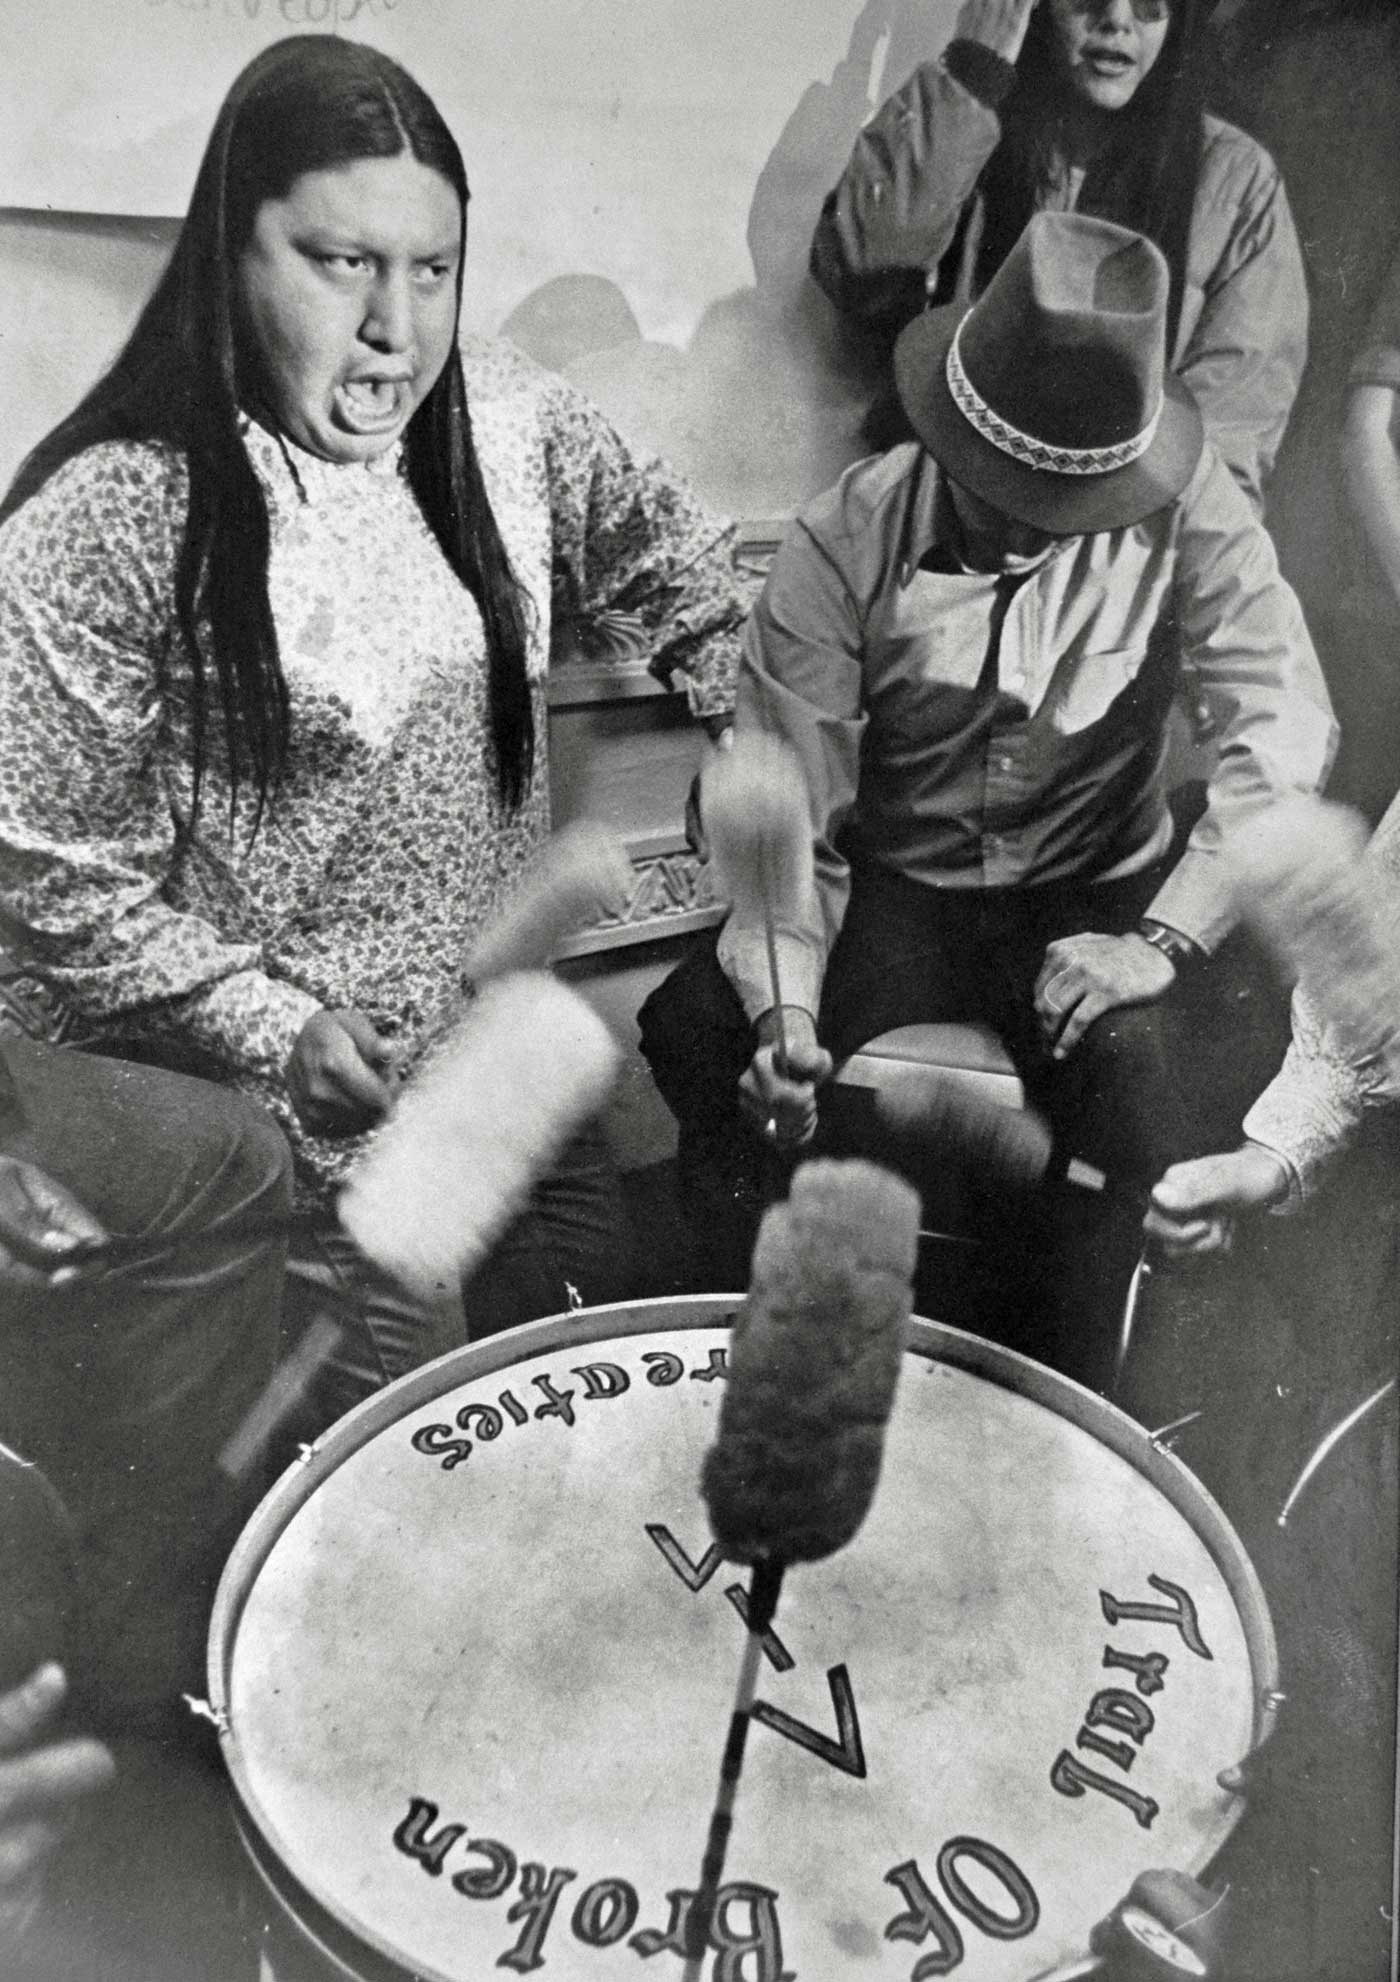 Black and white photograph of a drumming session in the Bureau of Indian Affairs in Washington, D.C. on the first day of demonstrations. ”Trail of Broken Treaties” and ”AIM” are painted on the drum.